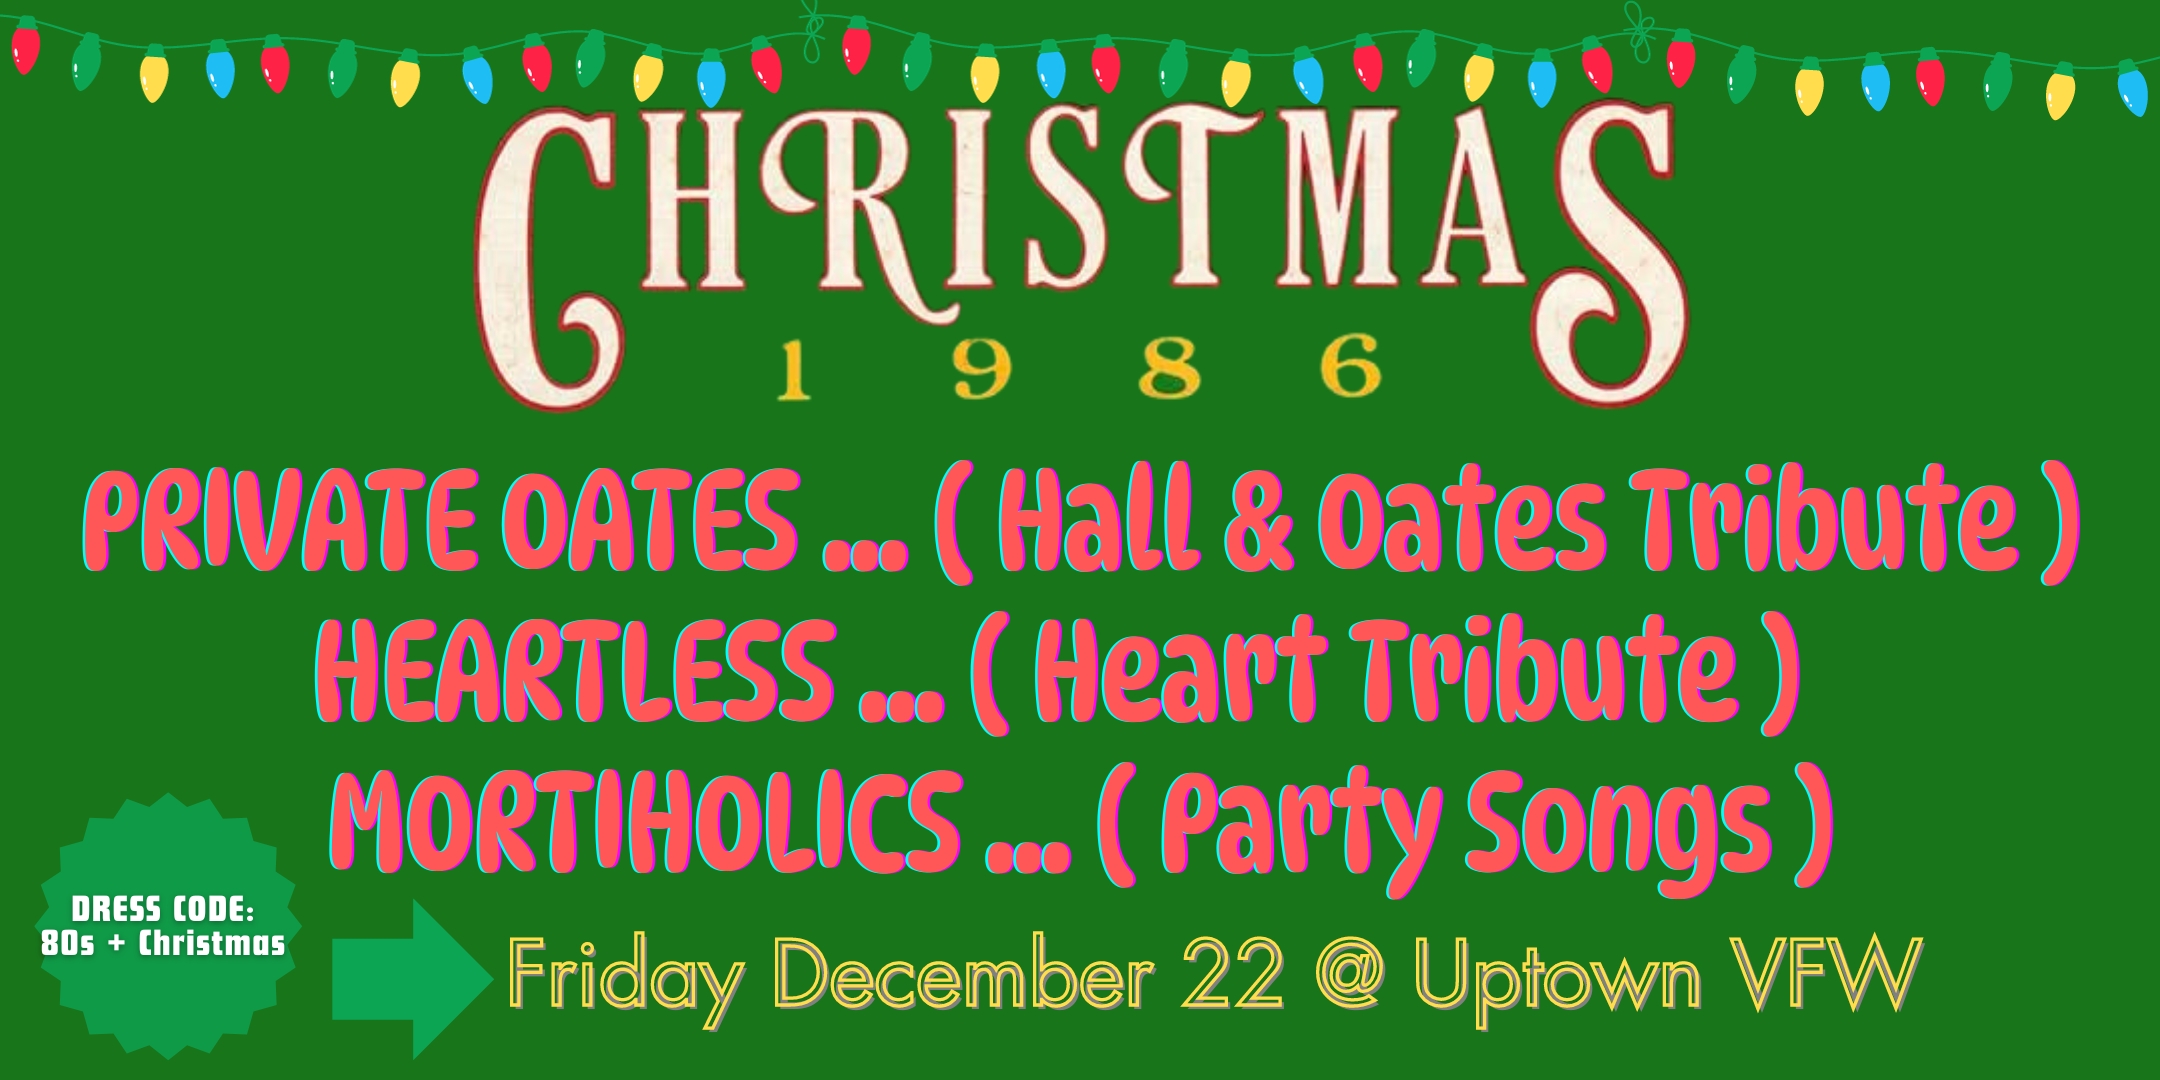 Christmas: 1986 Private Oates Heartless Mortiholics DRESS CODE: 80s + Christmas Friday, December 22 James Ballentine "Uptown" VFW Post 246 Doors 8:00pm :: Music 8:30pm :: 21+ GA $15 ADV / $20 DOS NO REFUNDS Tickets On-Sale Now